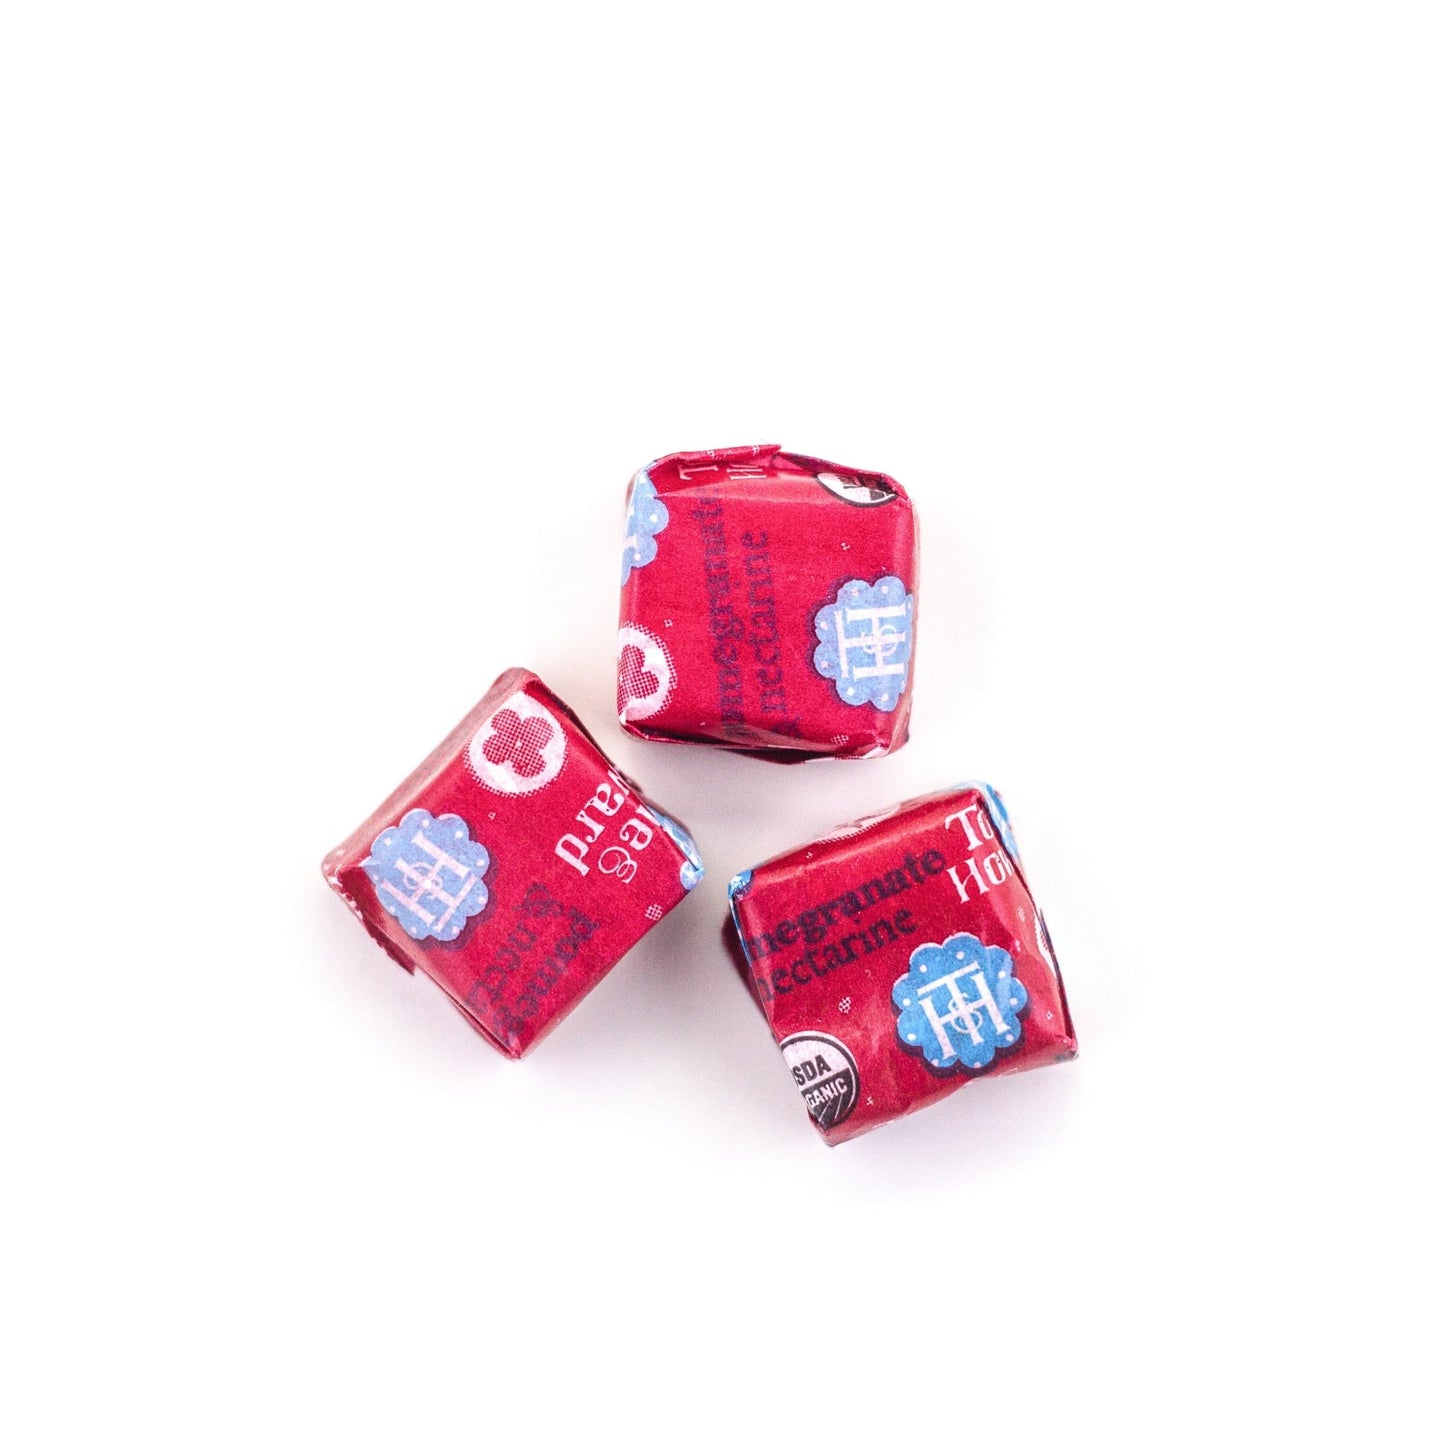 Chewie Fruities Pomegranate & Nectarine individually wrapped candy chews